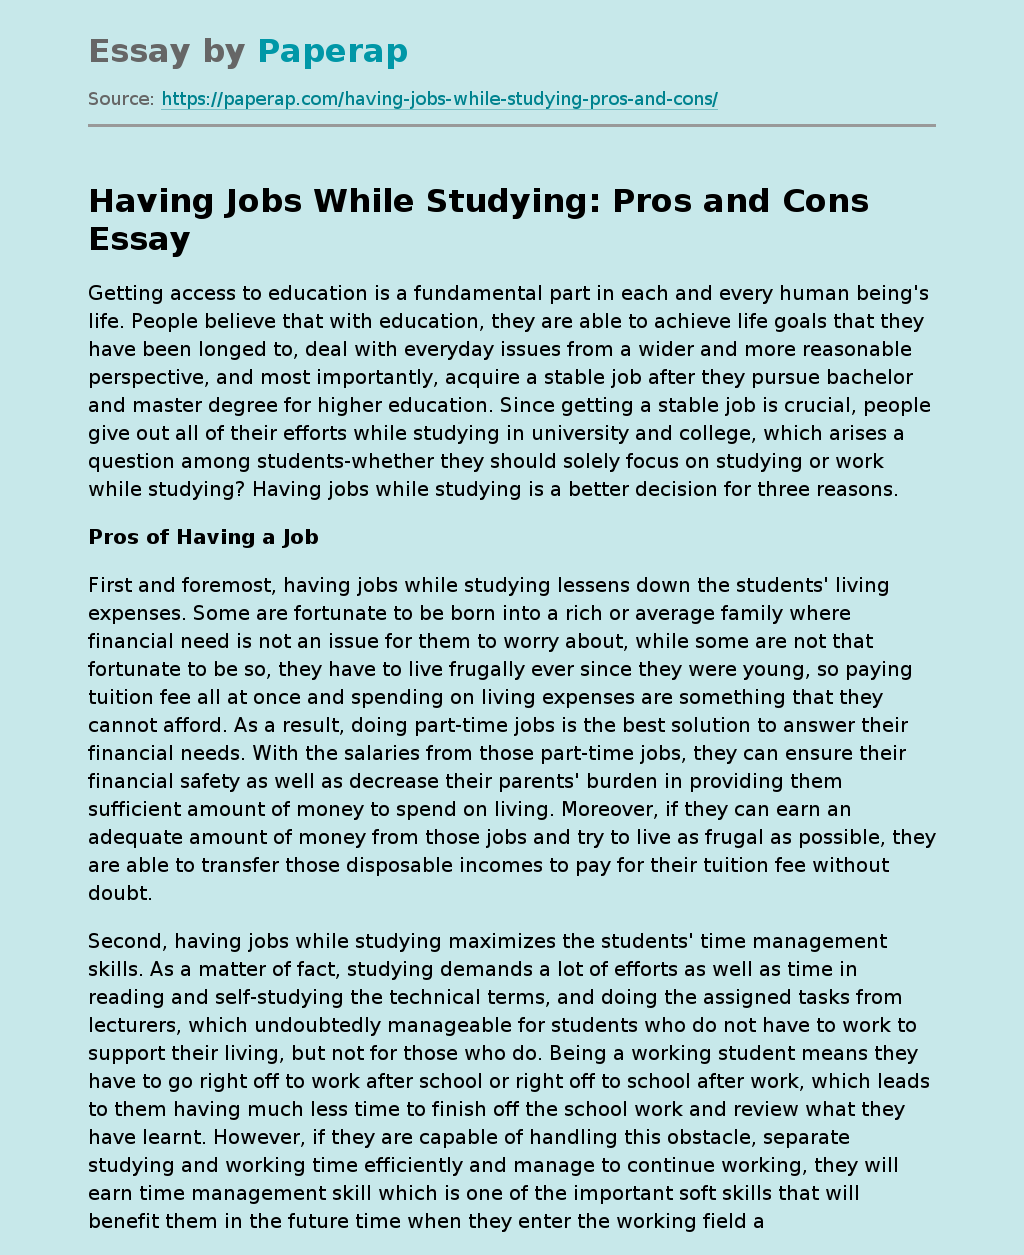 Having Jobs While Studying: Pros and Cons